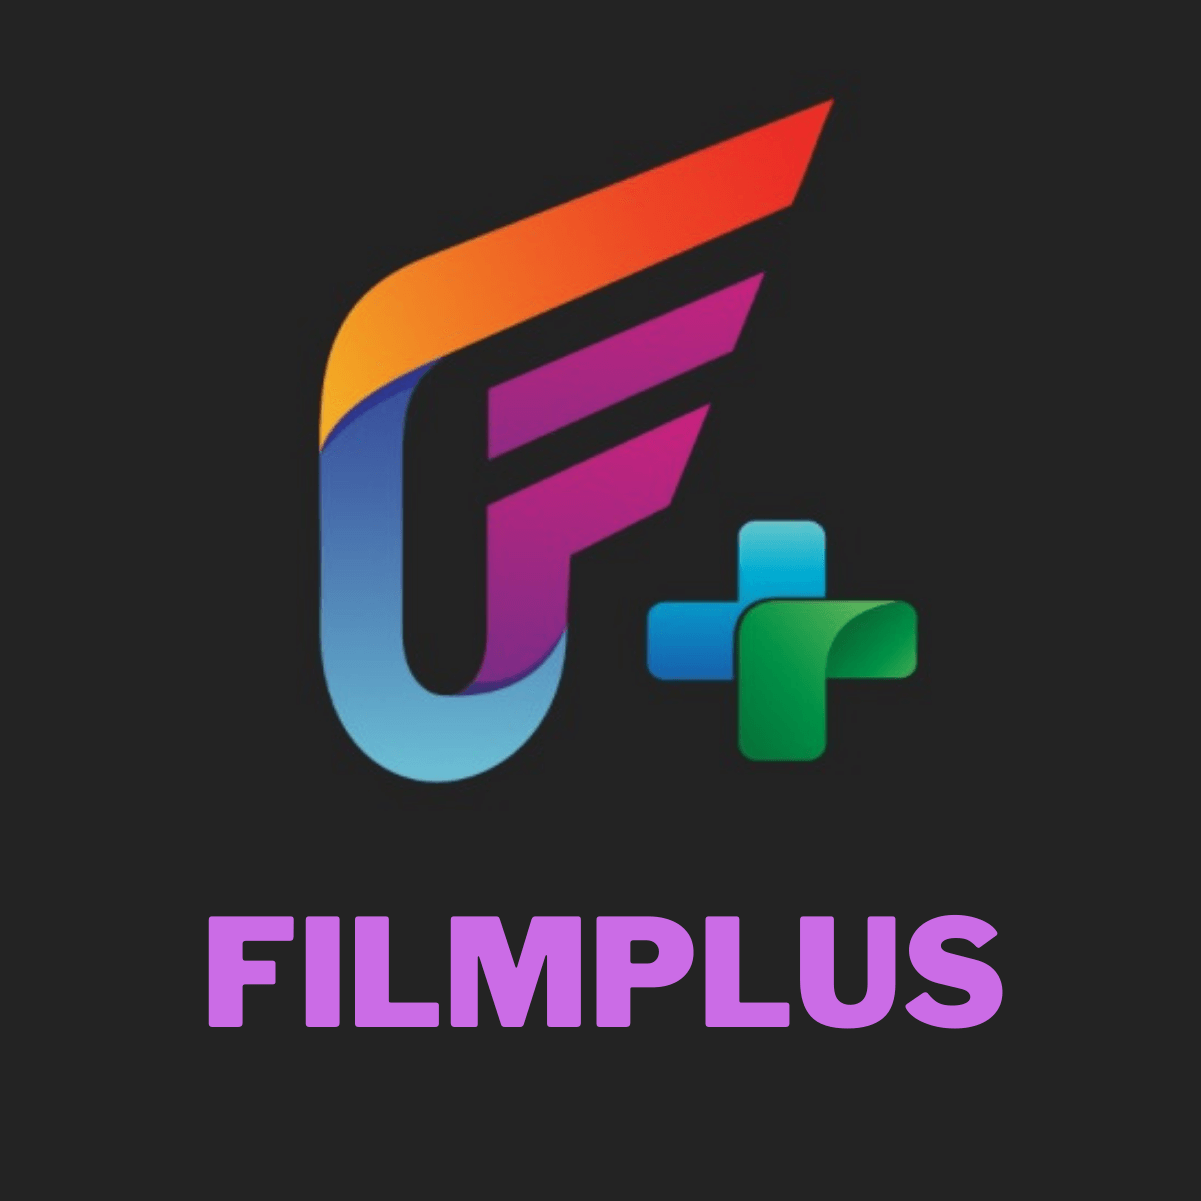 How To Download Film Plus On Firestick